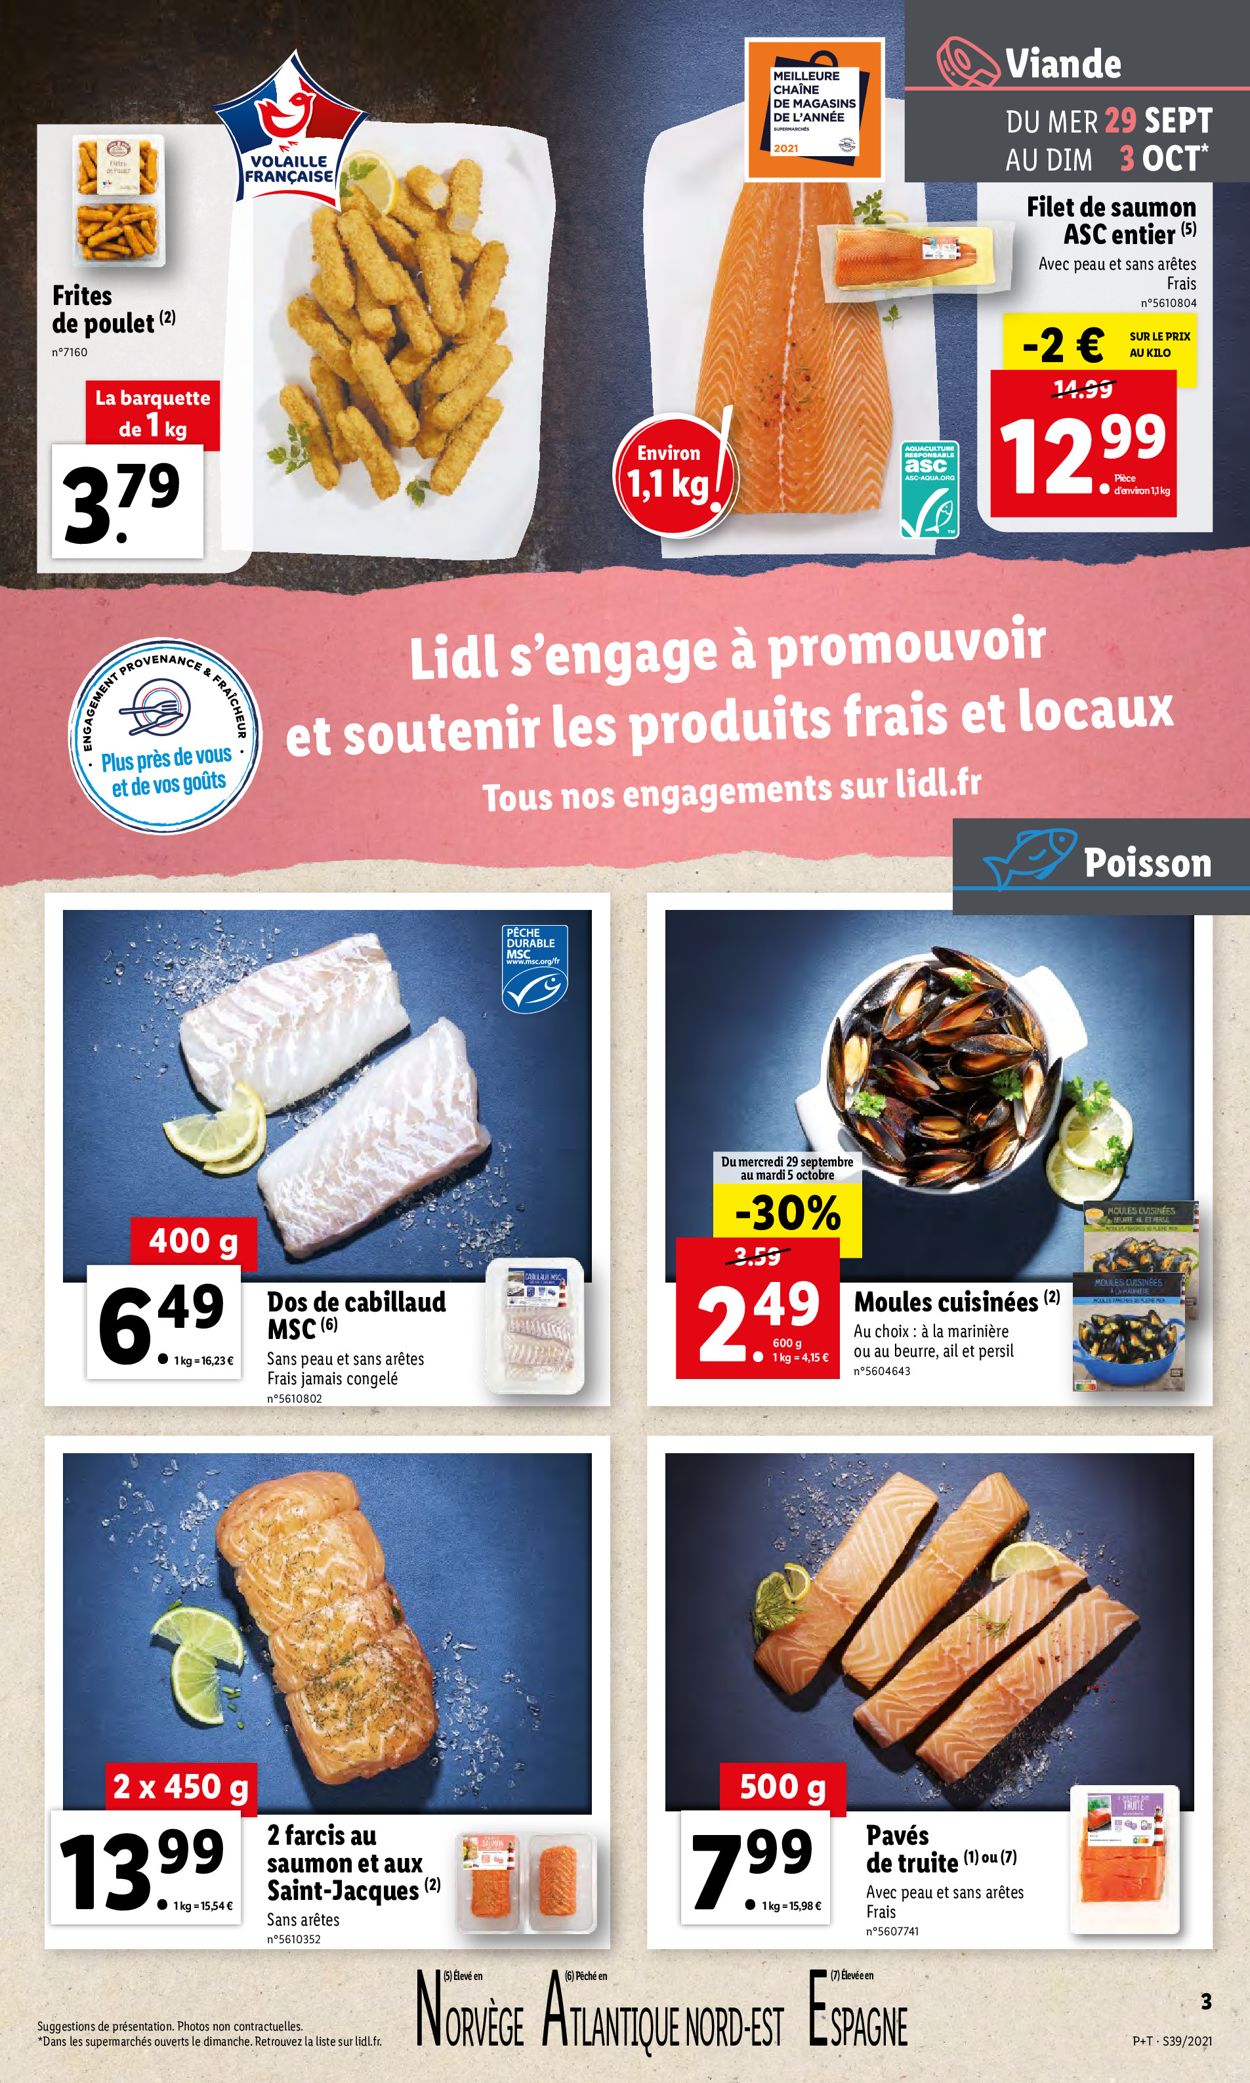 Lidl Catalogue - 29.09-05.10.2021 (Page 3)